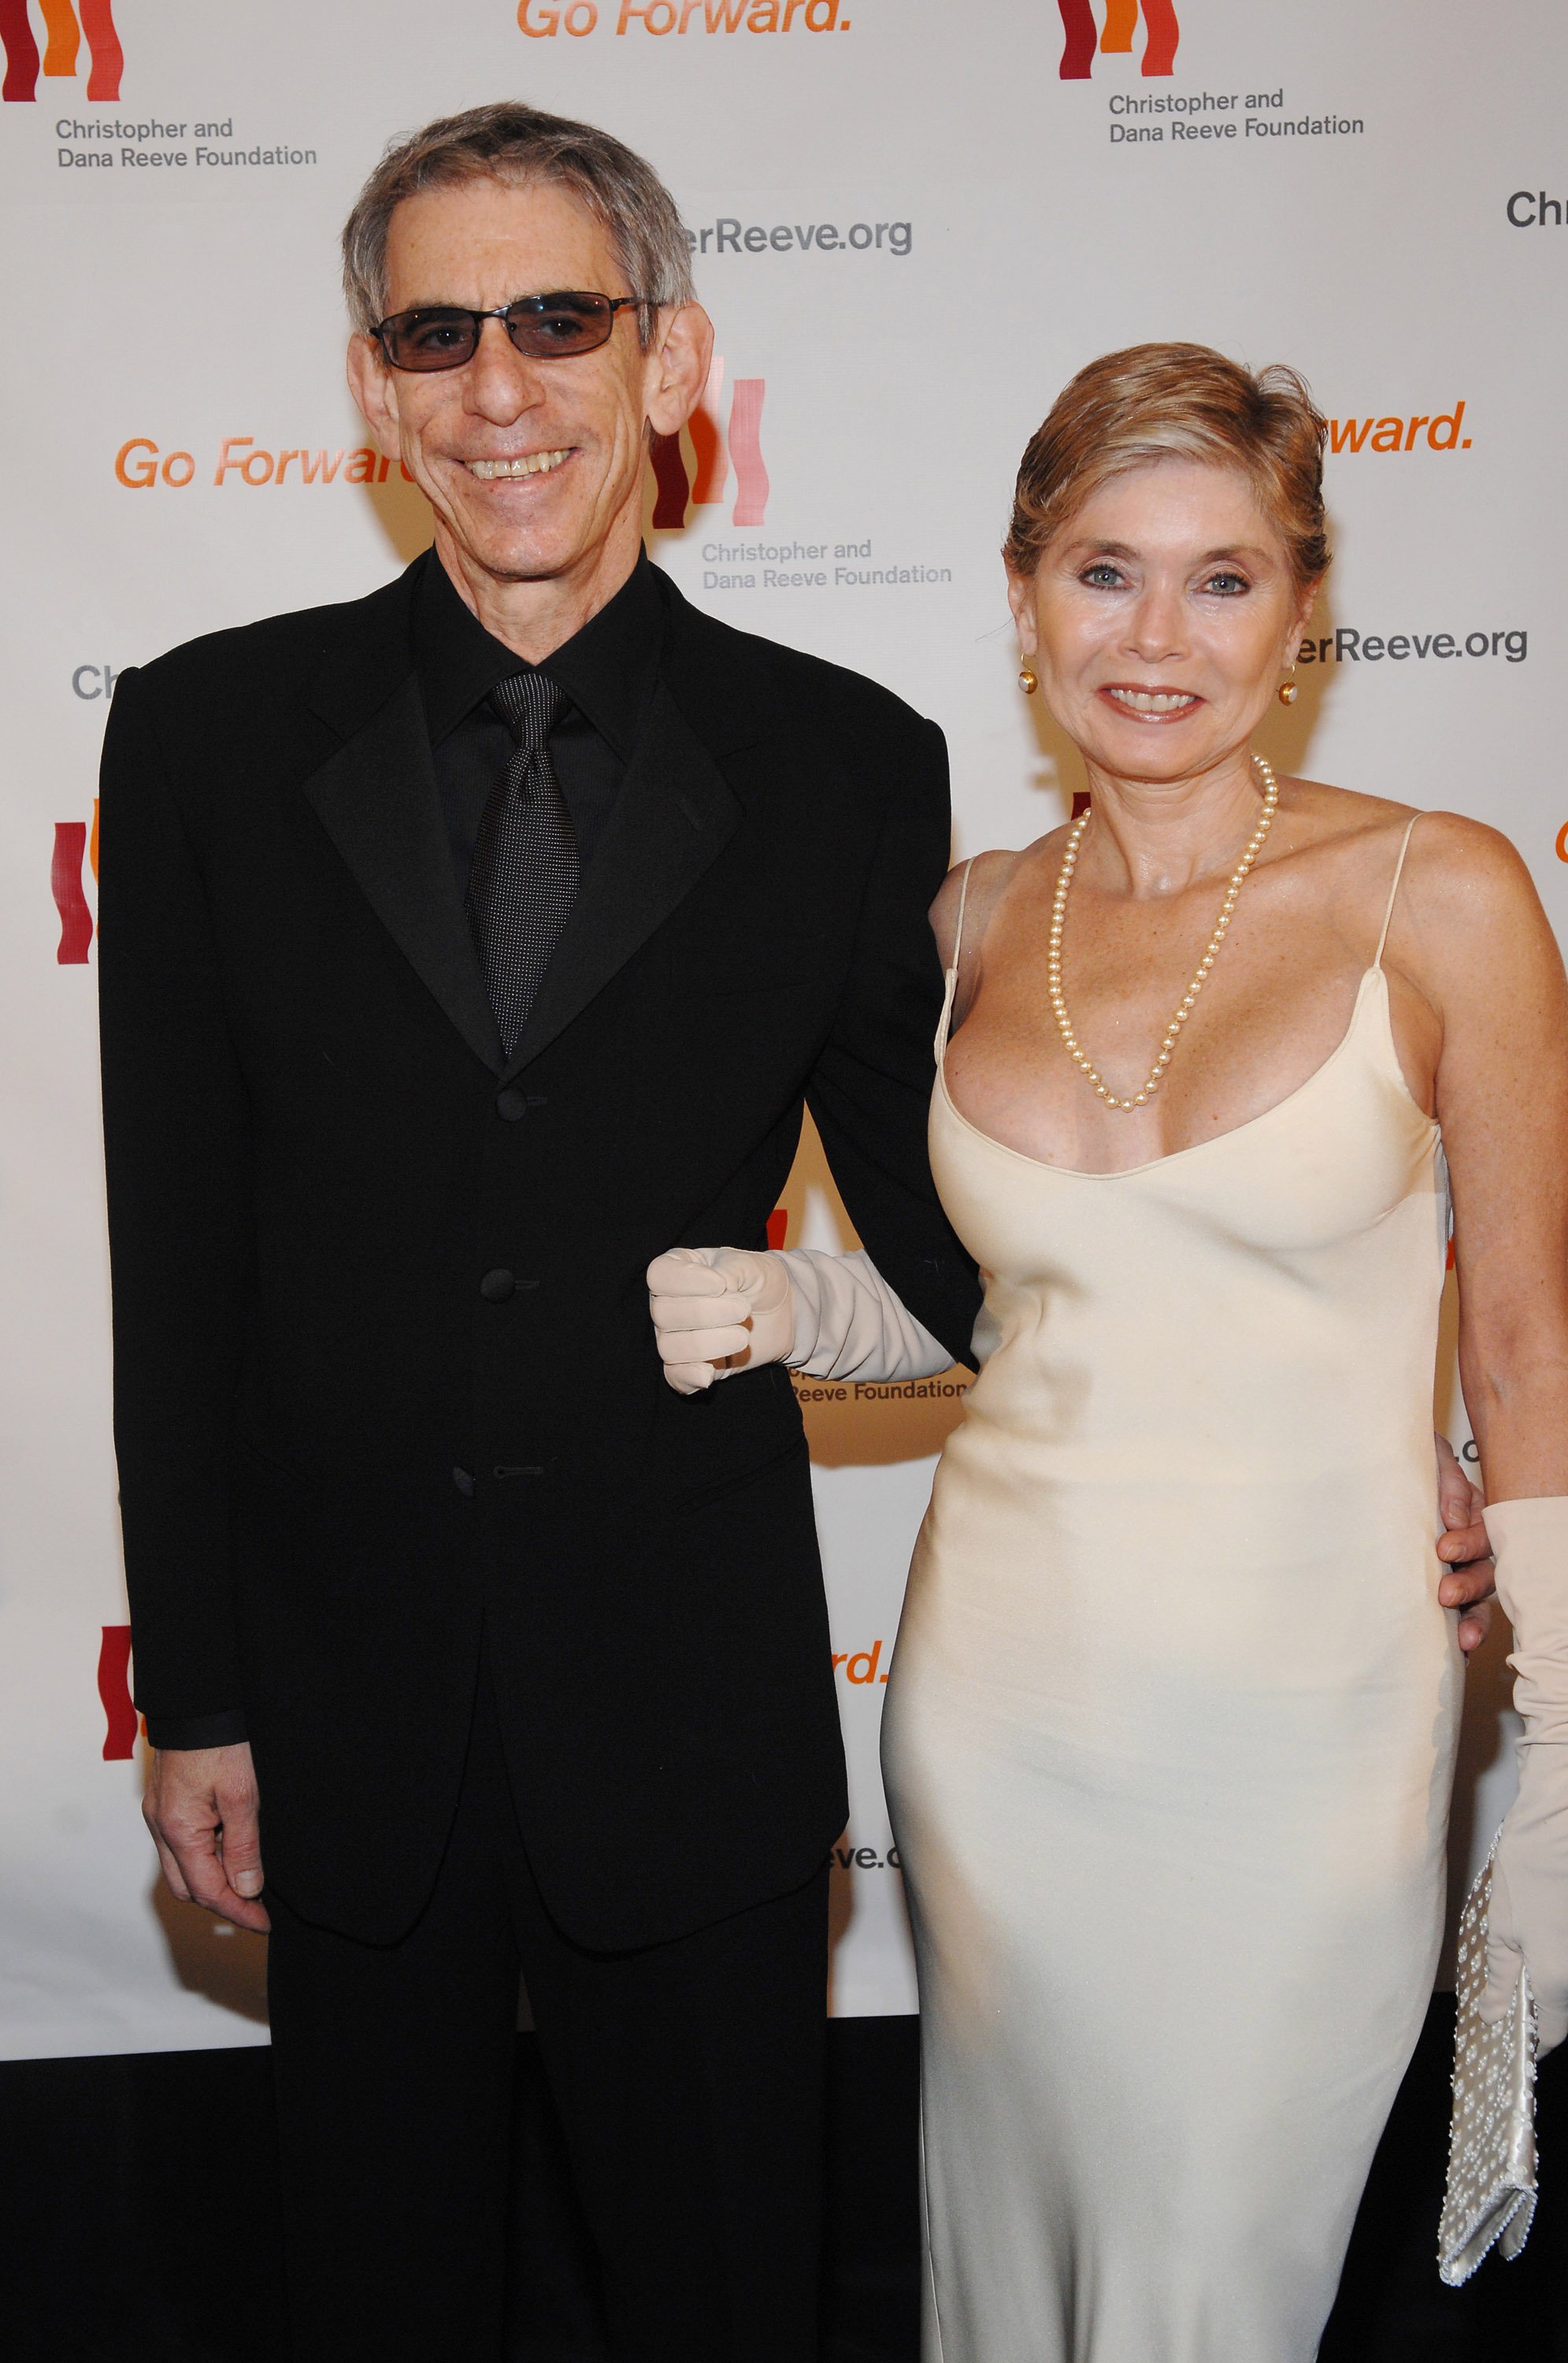 Richard Belzer and Harlee McBride at The Marriott Marquis on November 12, 2007 in New York City | Source: Getty Images